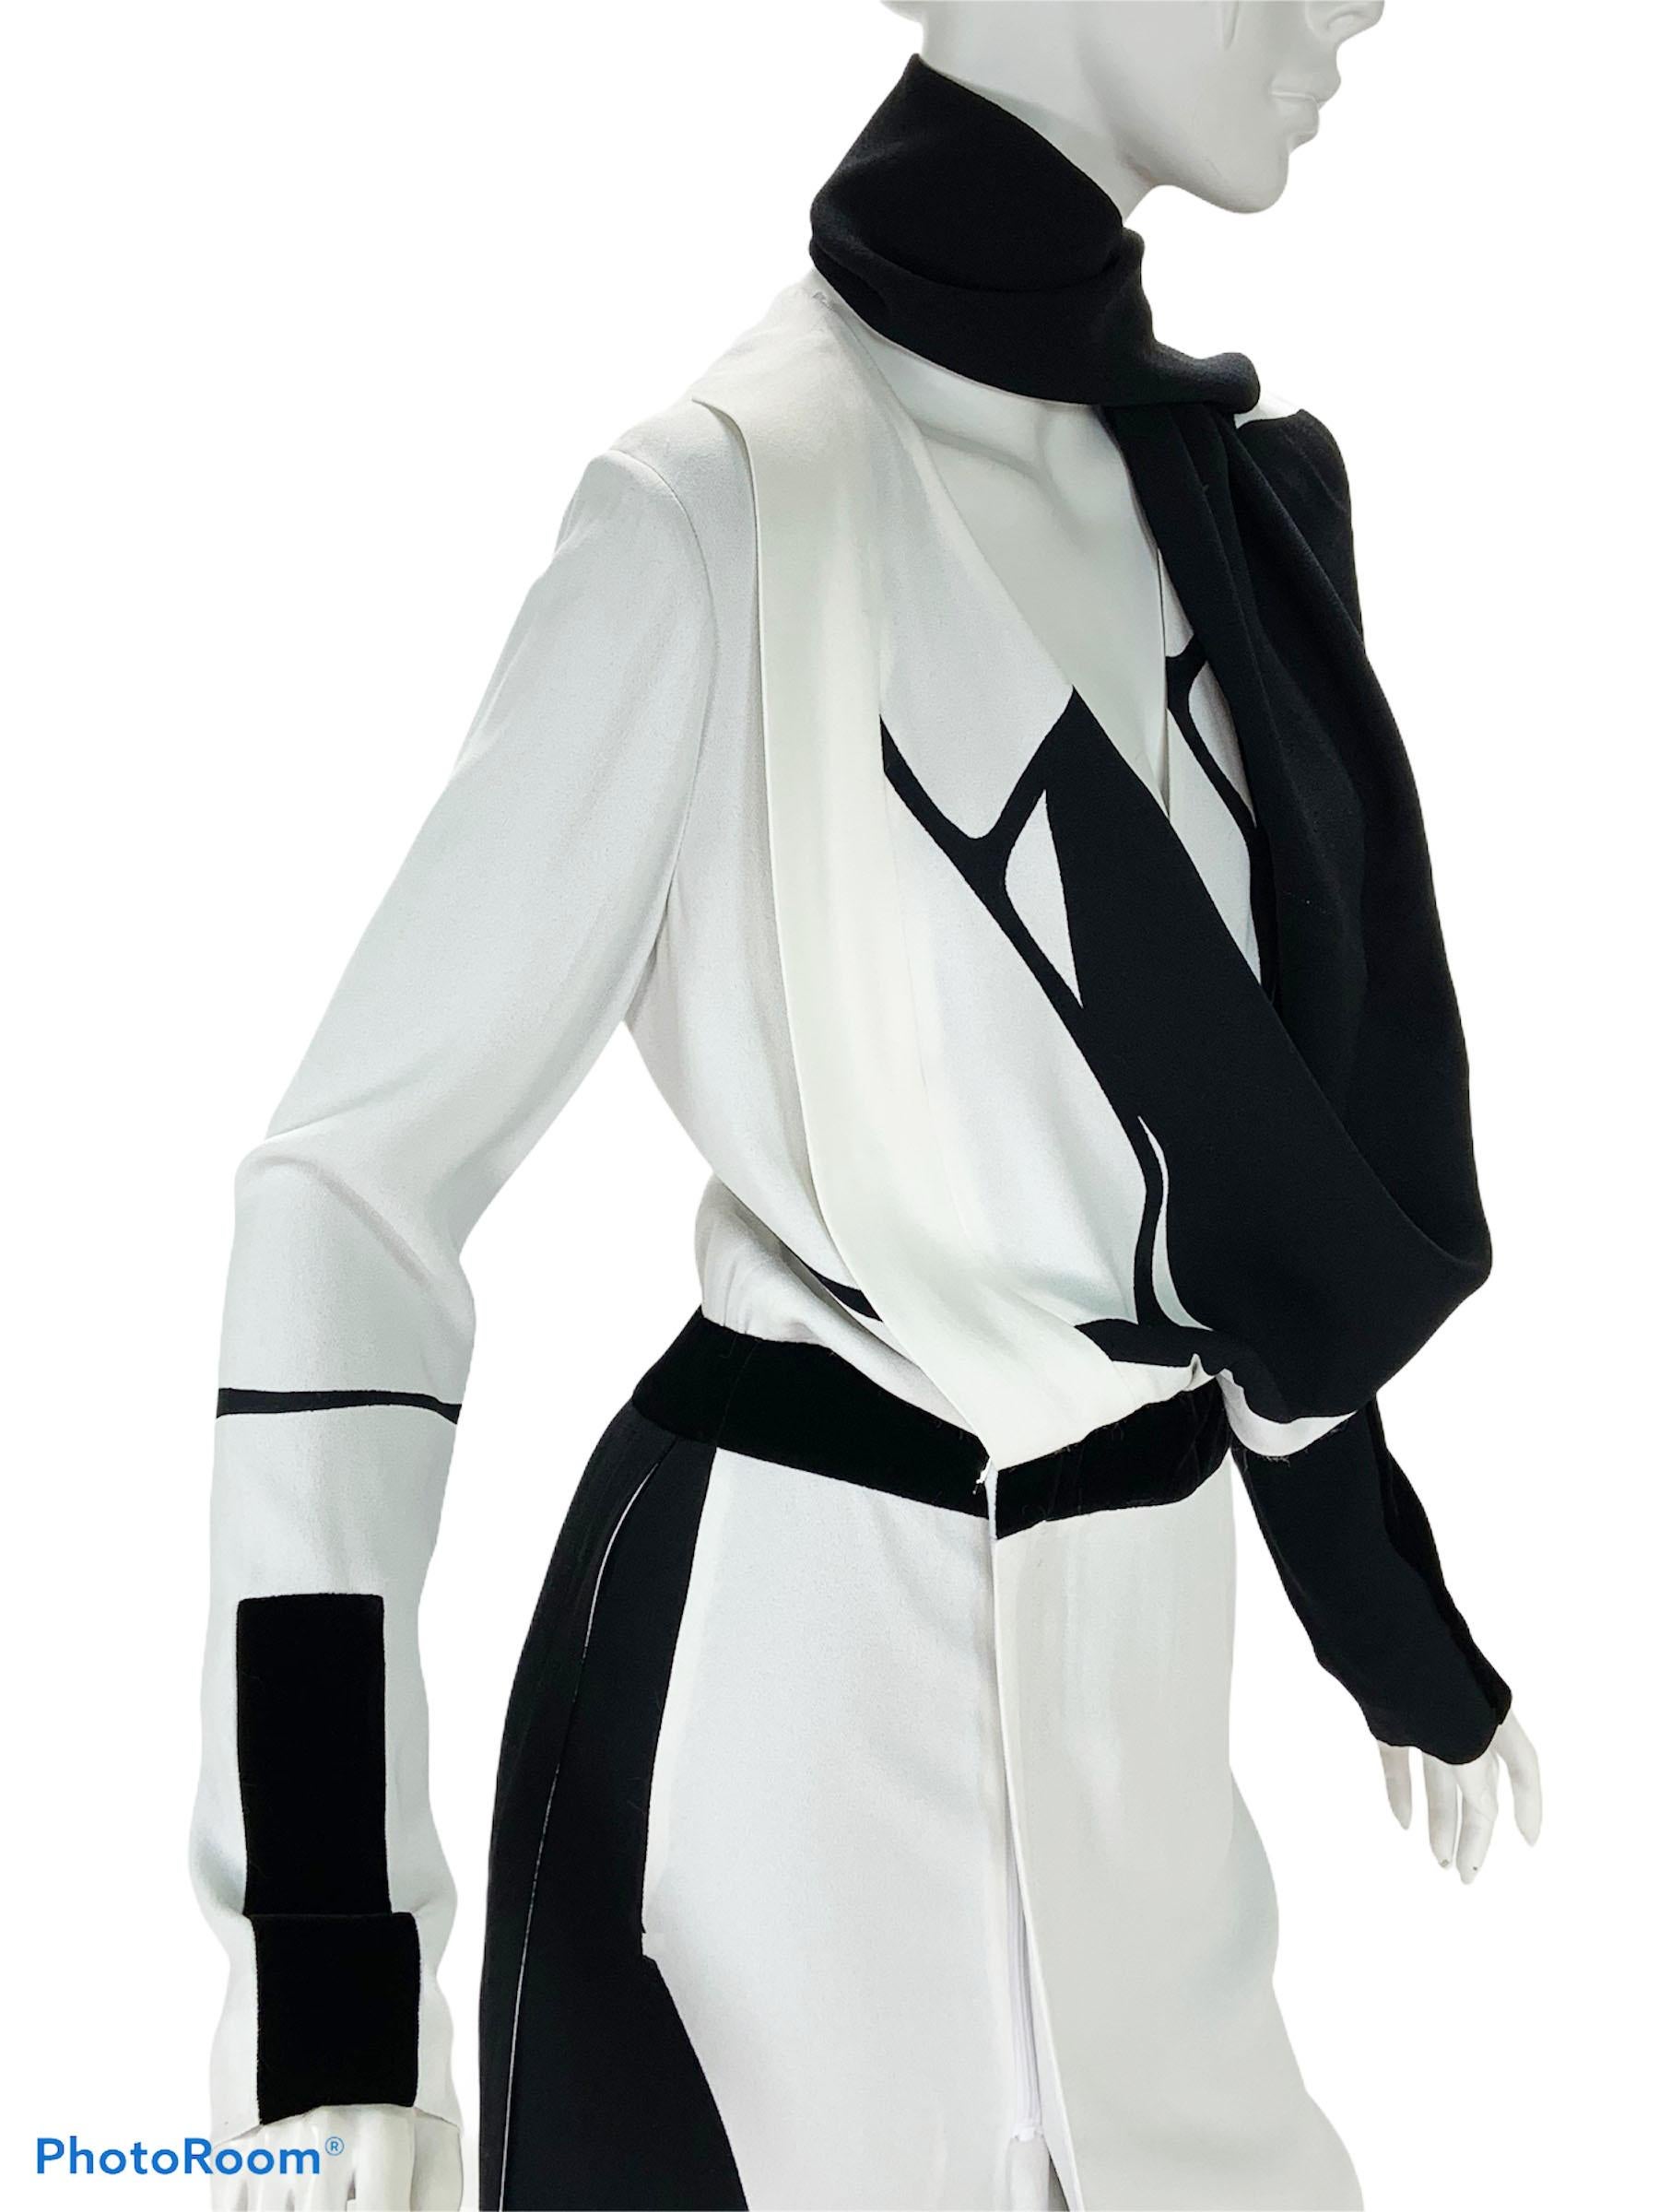 Women's New Tom Ford S/S 2017 Collection White Black Color-Block Cocktail Dress 38 & 40 For Sale